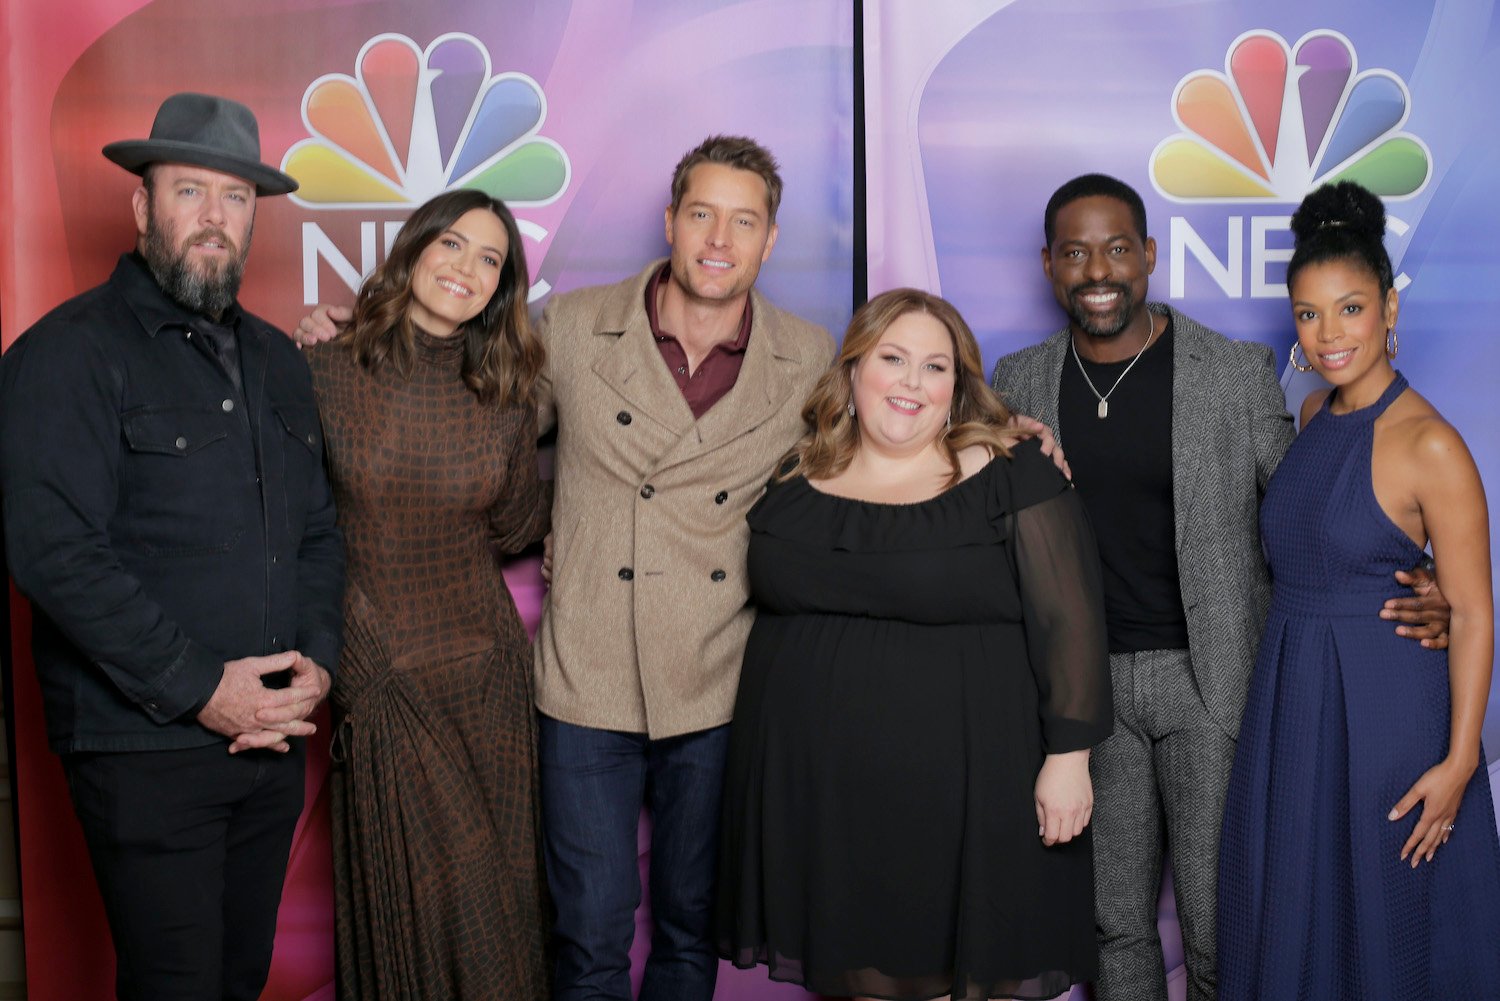 Chrissy Metz and the cast of 'This Is Us' pose together at the 2020 NBCUniversal Press Tour event.